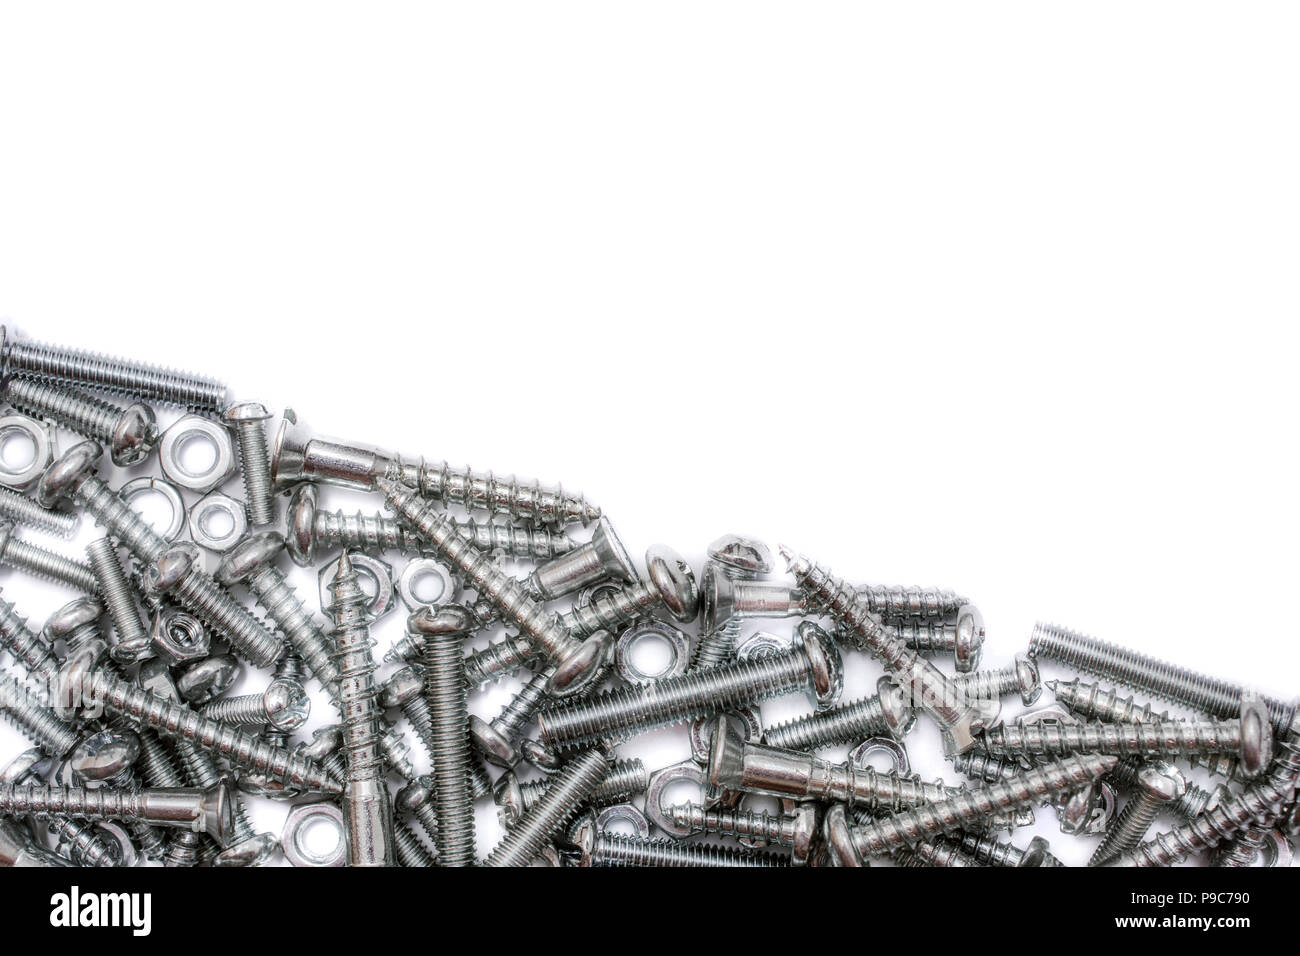 Medium Size Collection Of Iron Screws, Wood Screws and Bolts With A Diagonal Line For Text Stock Photo